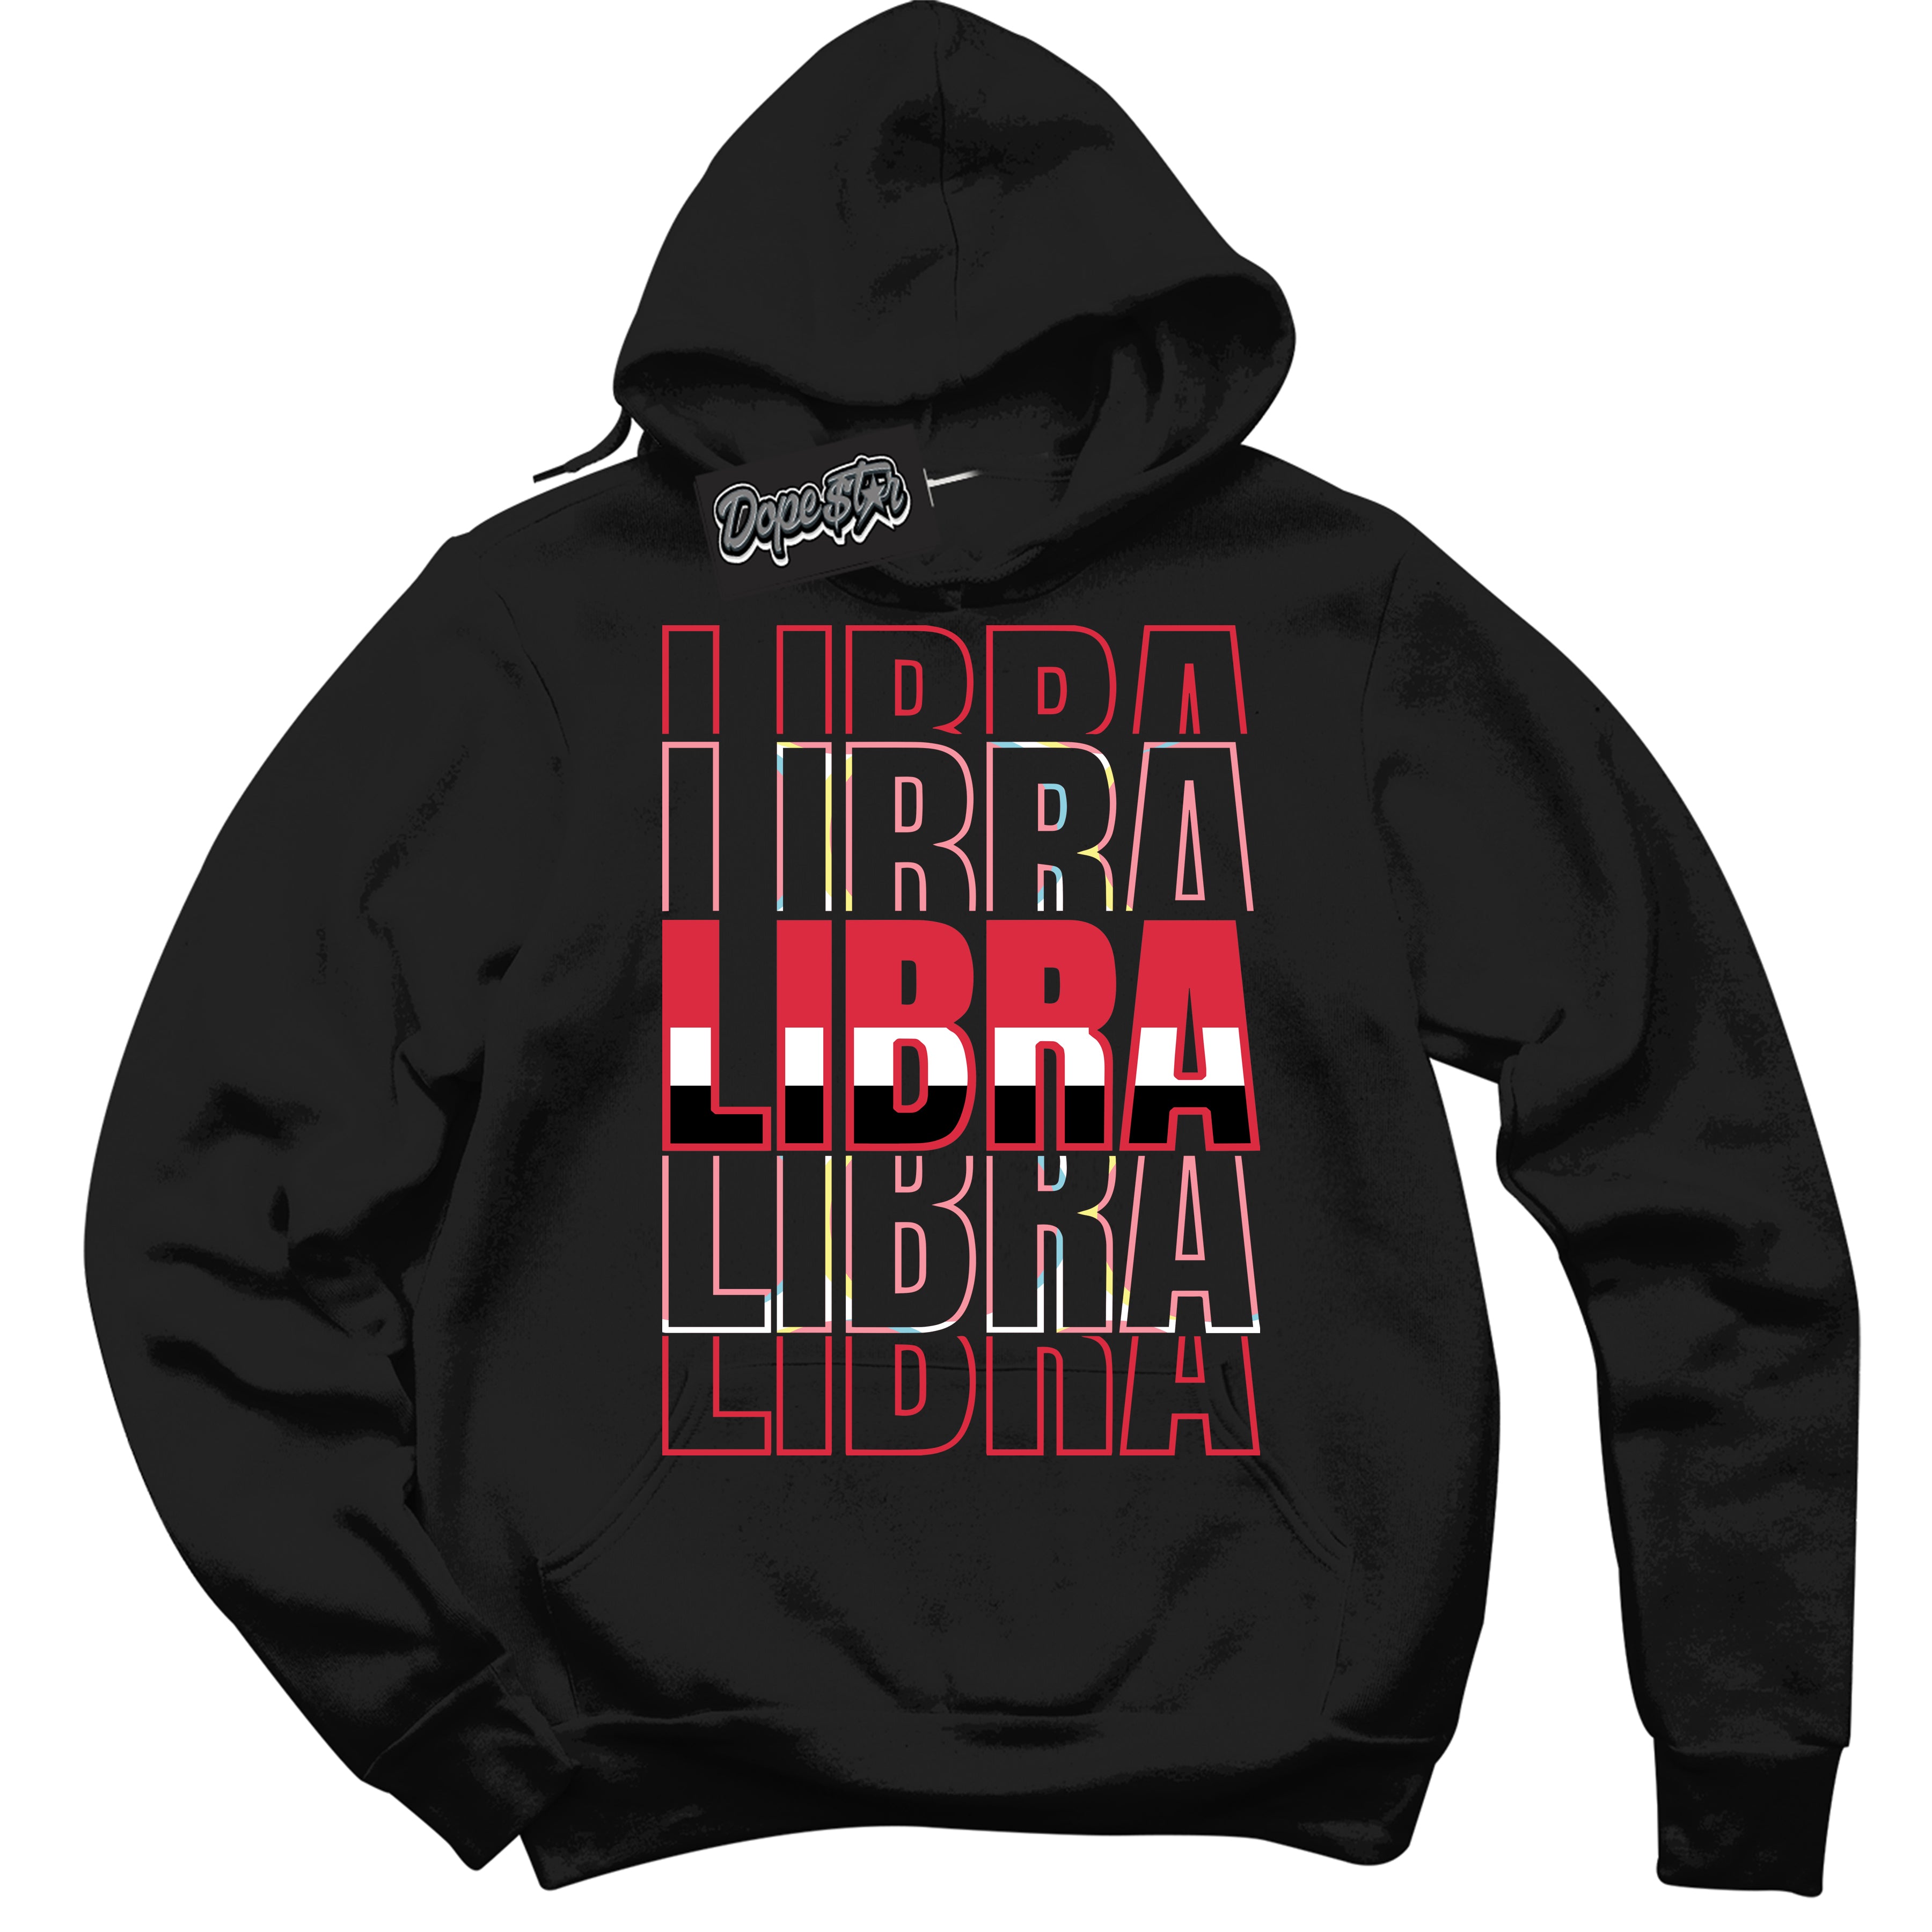 Cool Black Graphic DopeStar Hoodie with “ Libra “ print, that perfectly matches Spider-Verse 1s sneakers